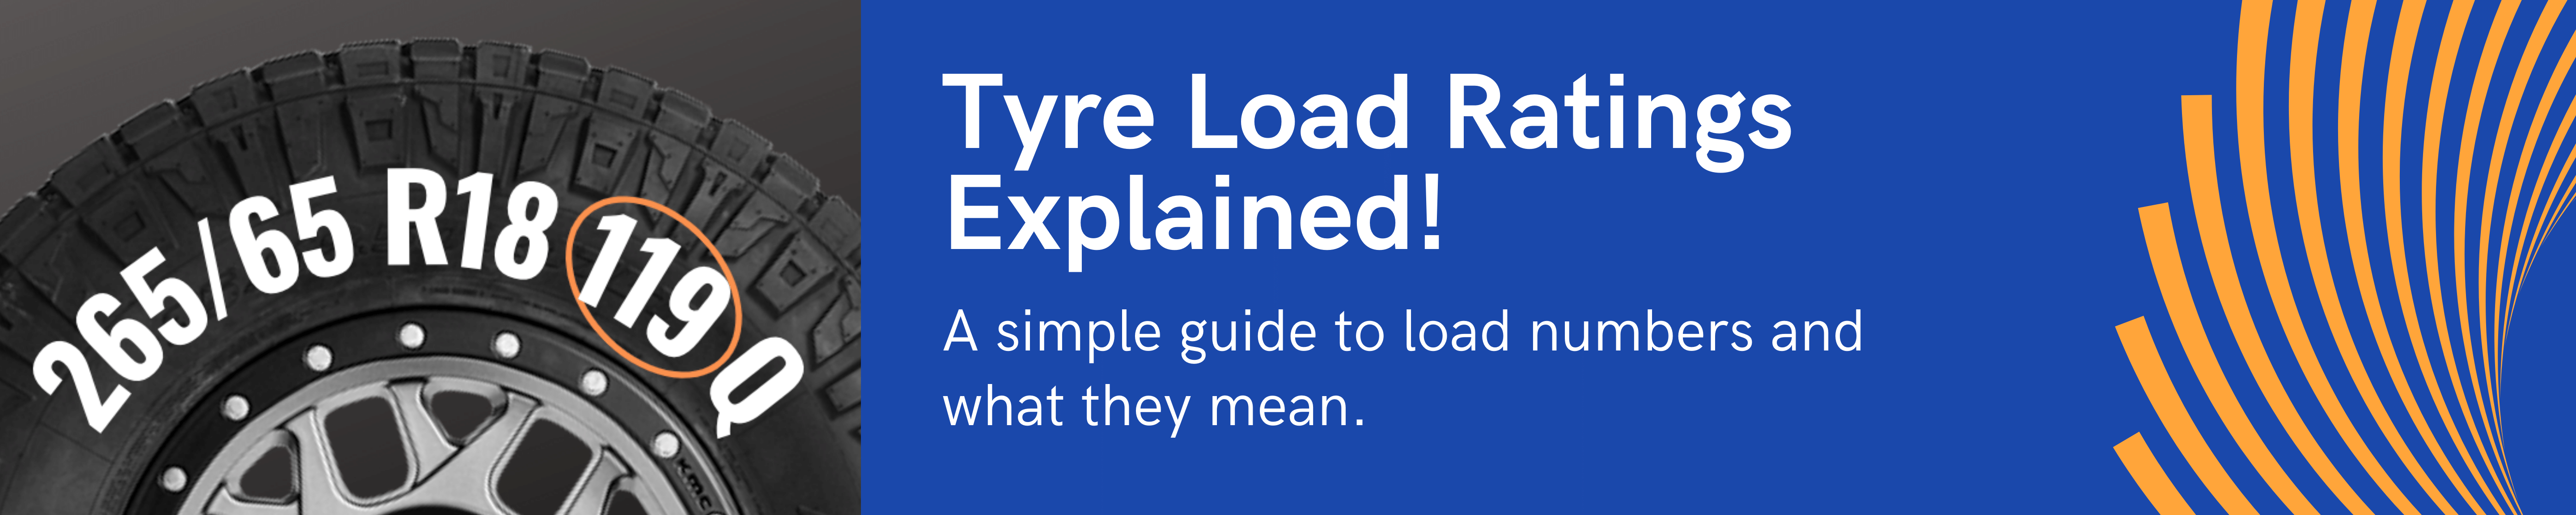 tyre load rating